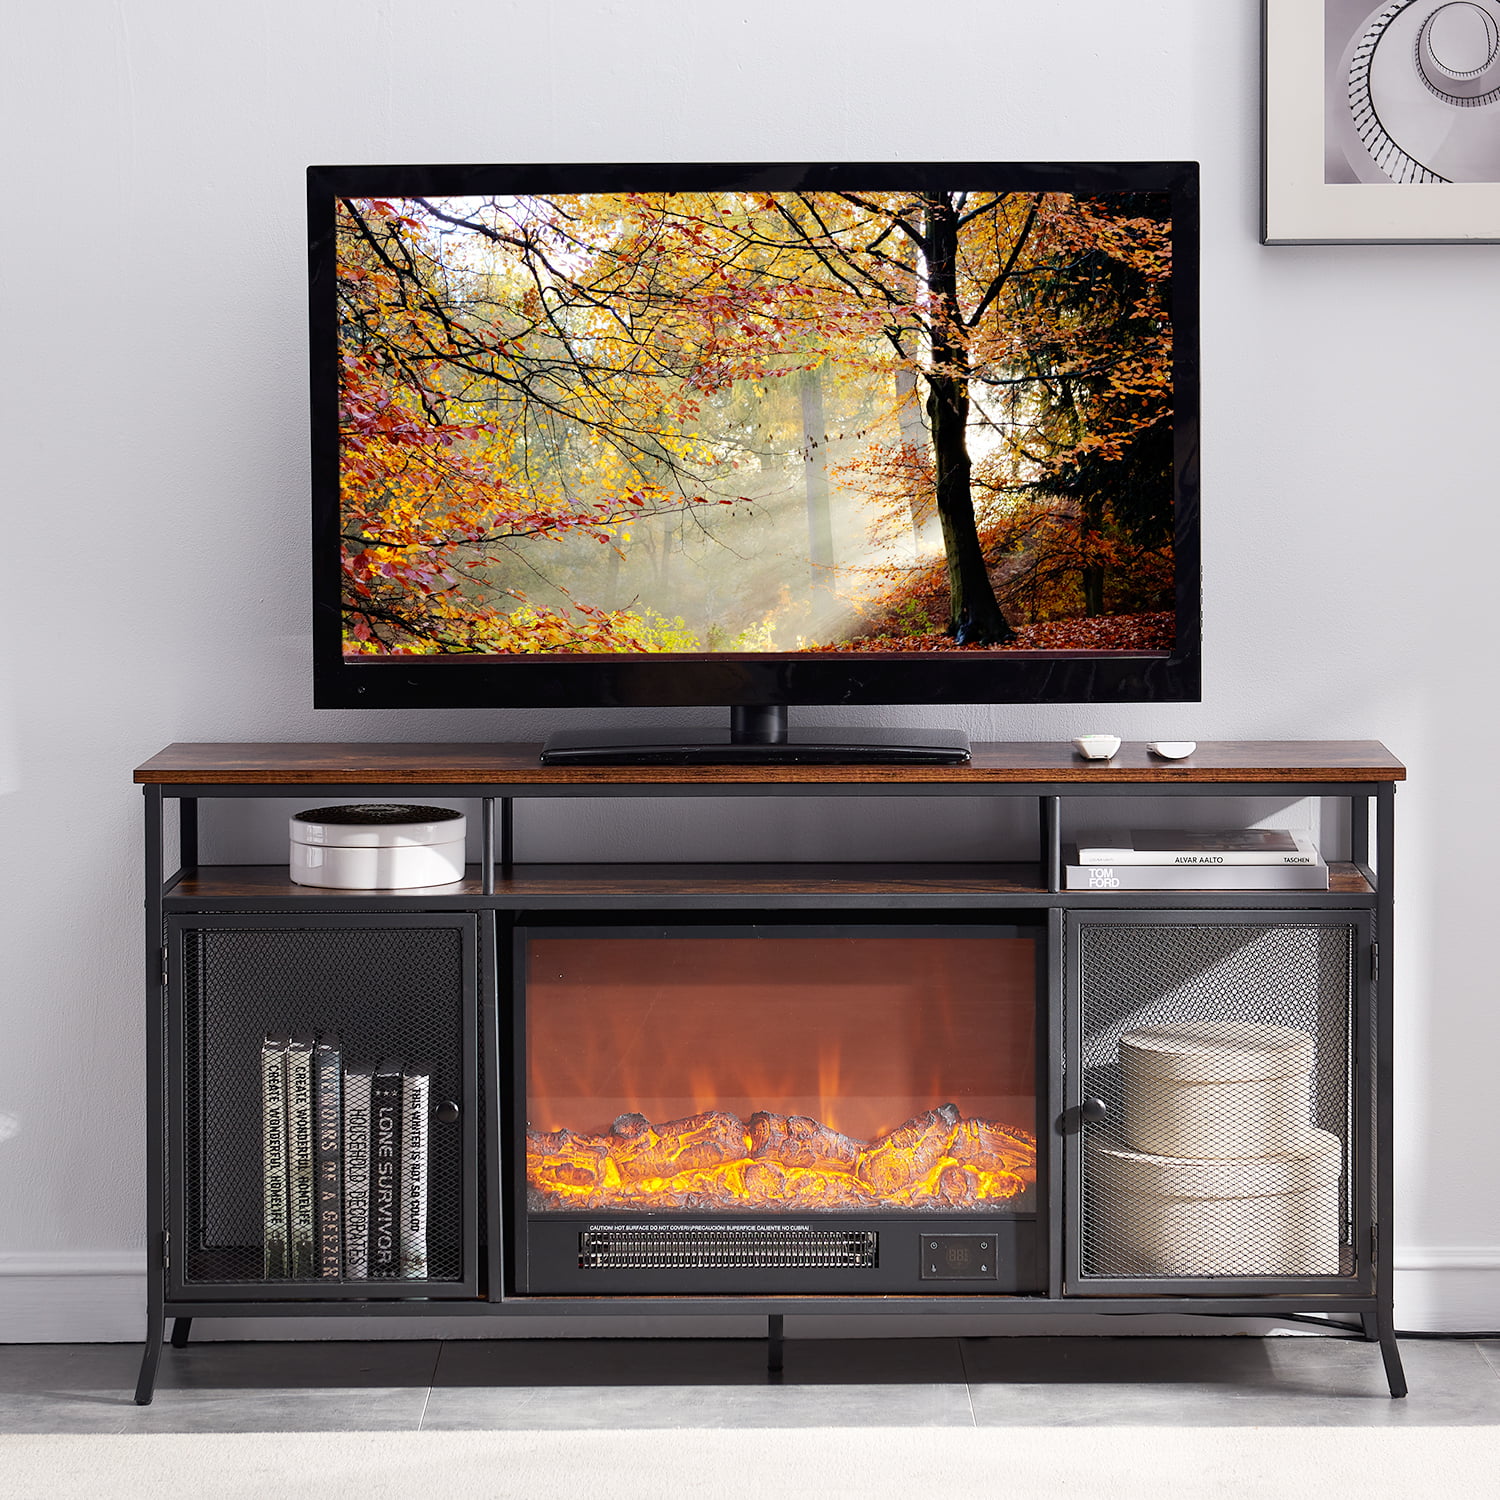 60 Inch Electric Fireplace Tv Stand, Schuyler Tv Stand For Tvs Up 60 With Electric Fireplace